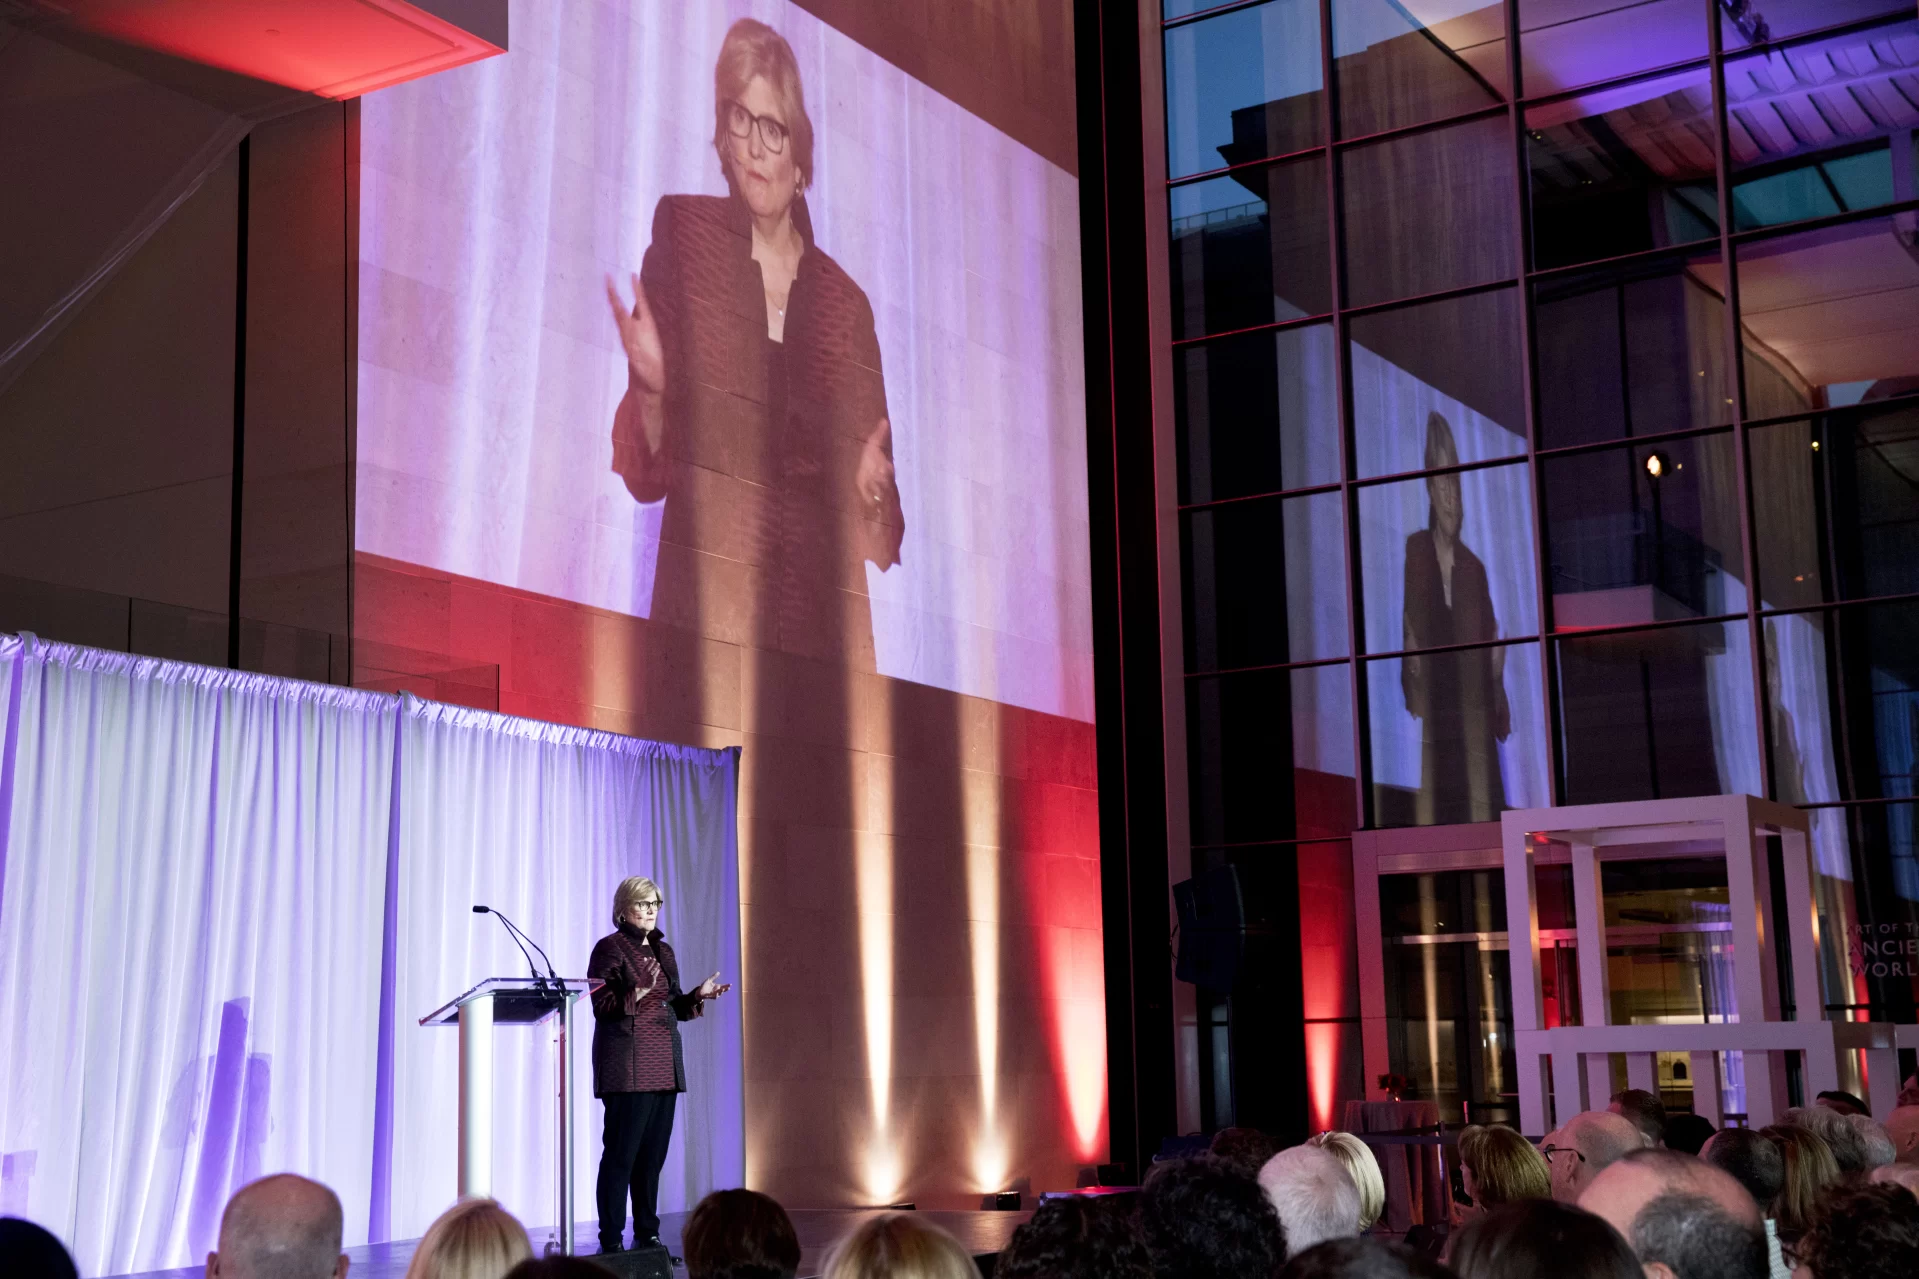 Spencer speaks at the launch of the $300 million Bates Campaign on May 17, 2017, before a record-setting crowd of Bates supporters at the Museum of Fine Arts in Boston, Mass.